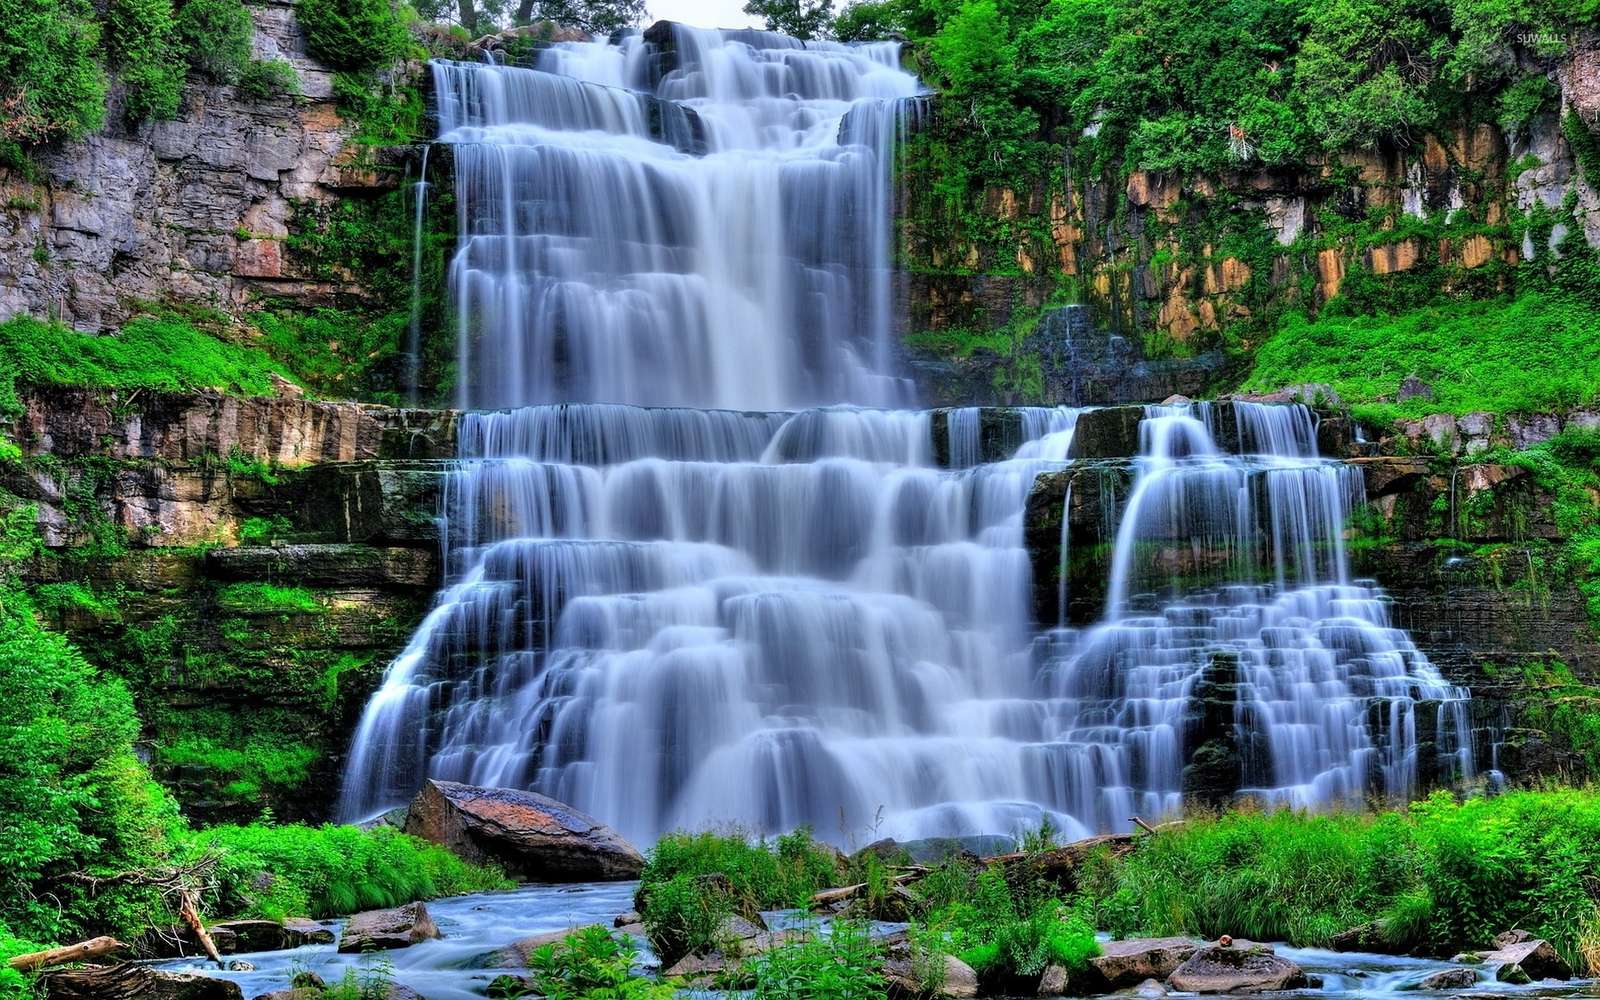 Water Falls In Green puzzle online from photo